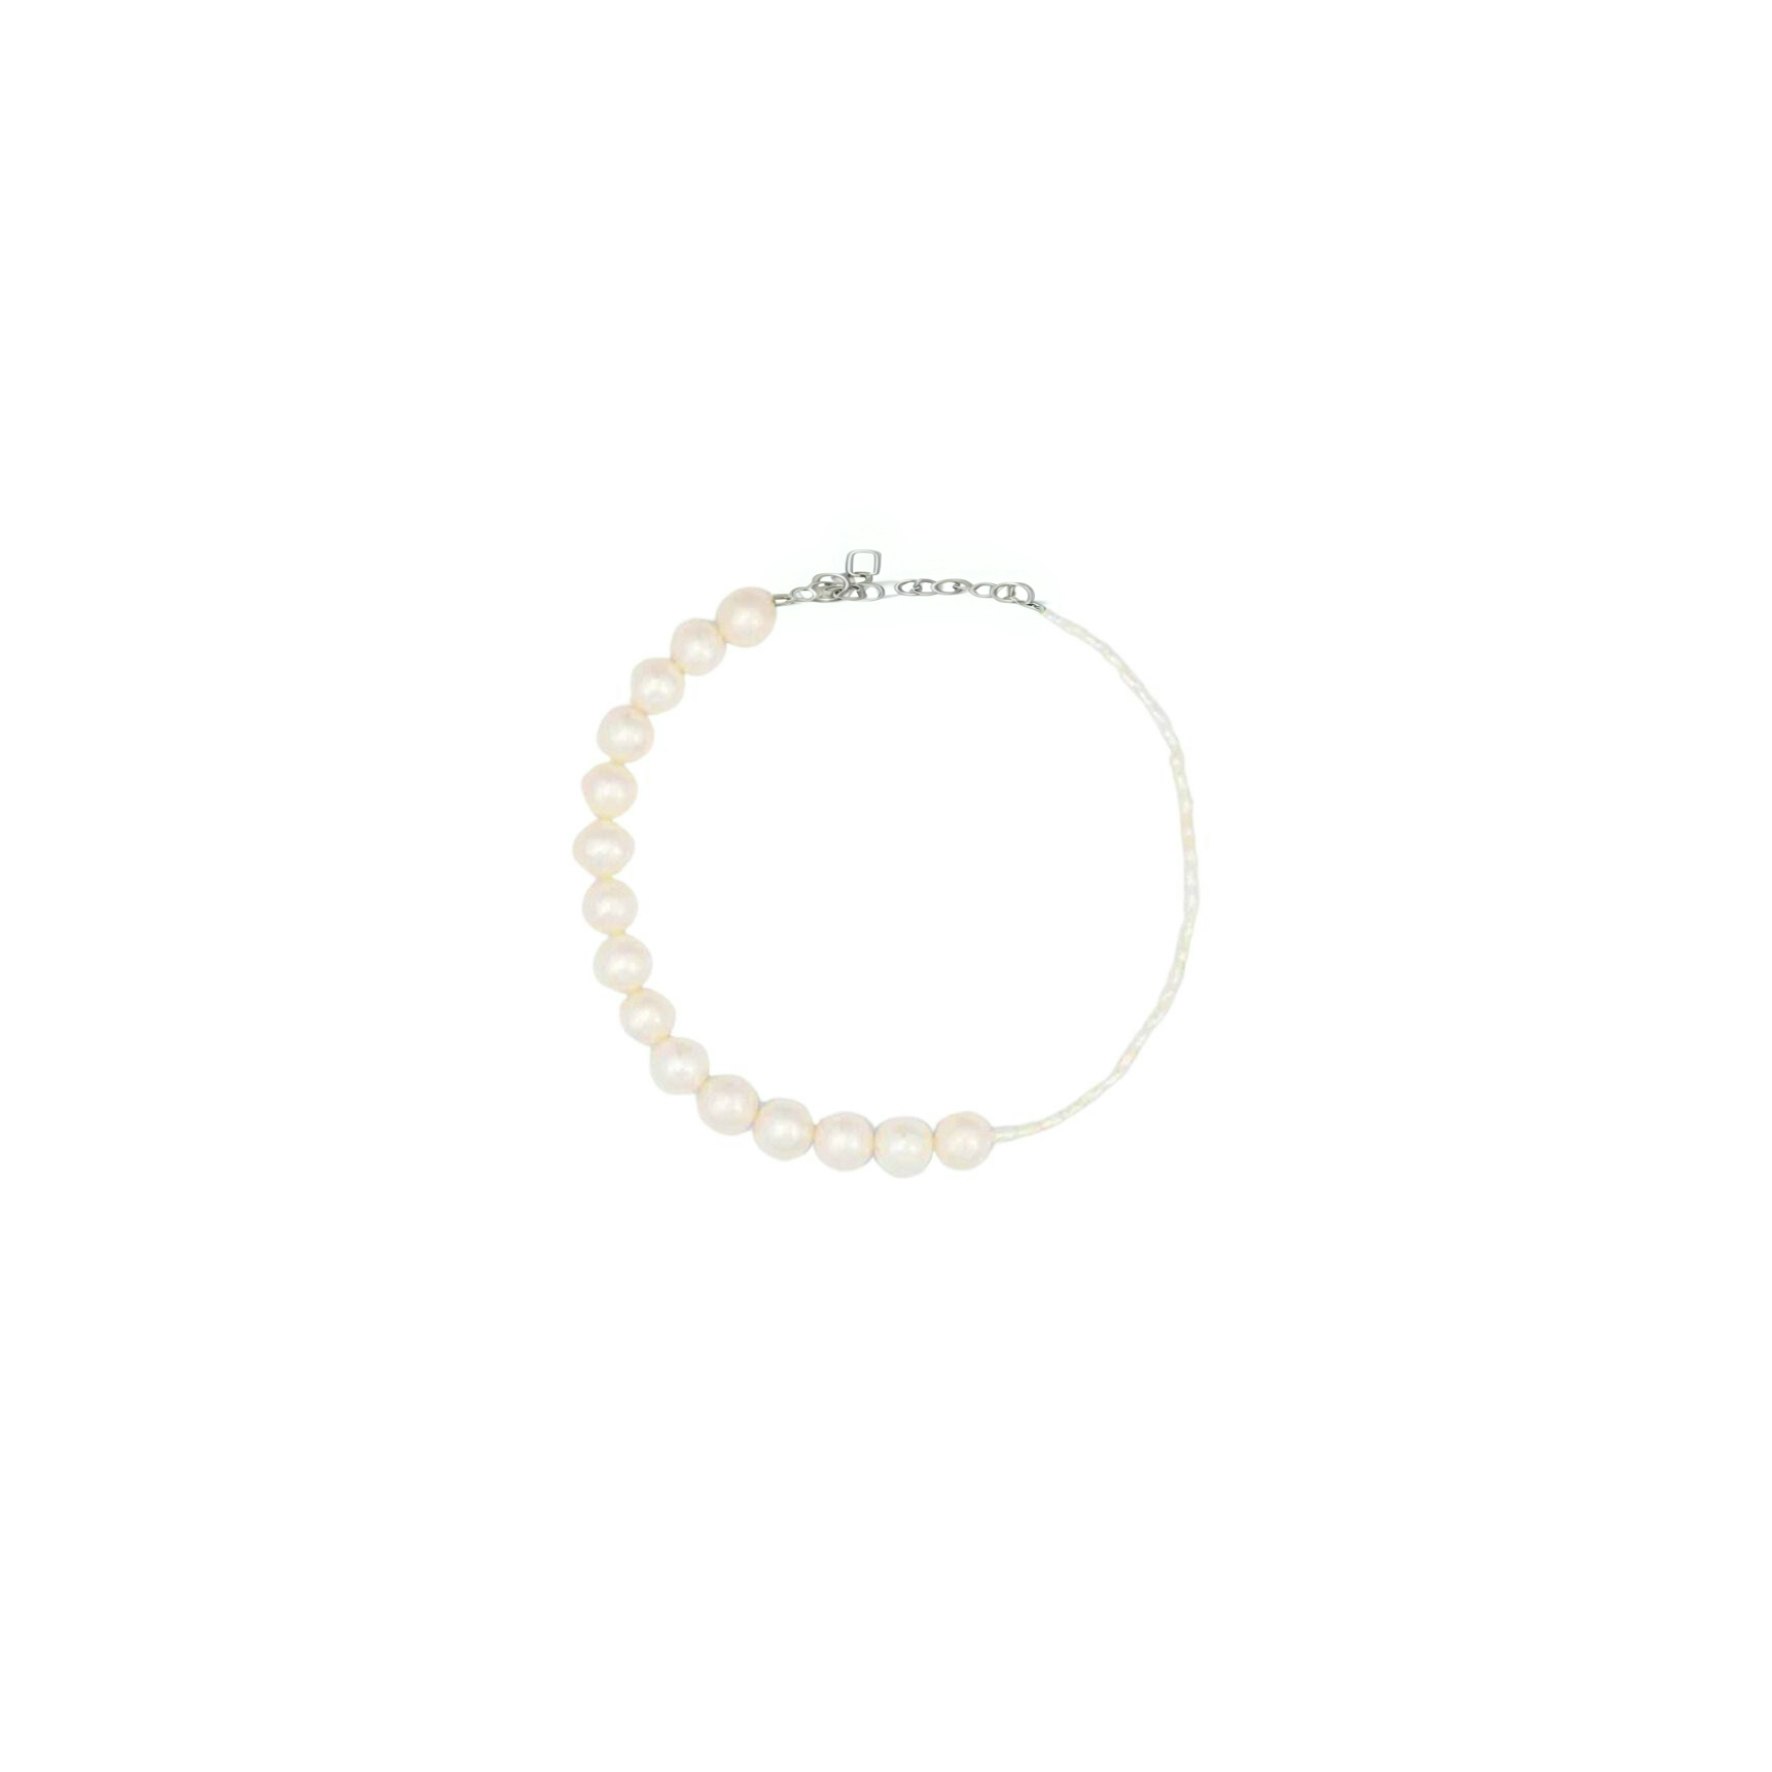 Sunce Anklet from Sorelle Jewellery in Silver Sterling 925